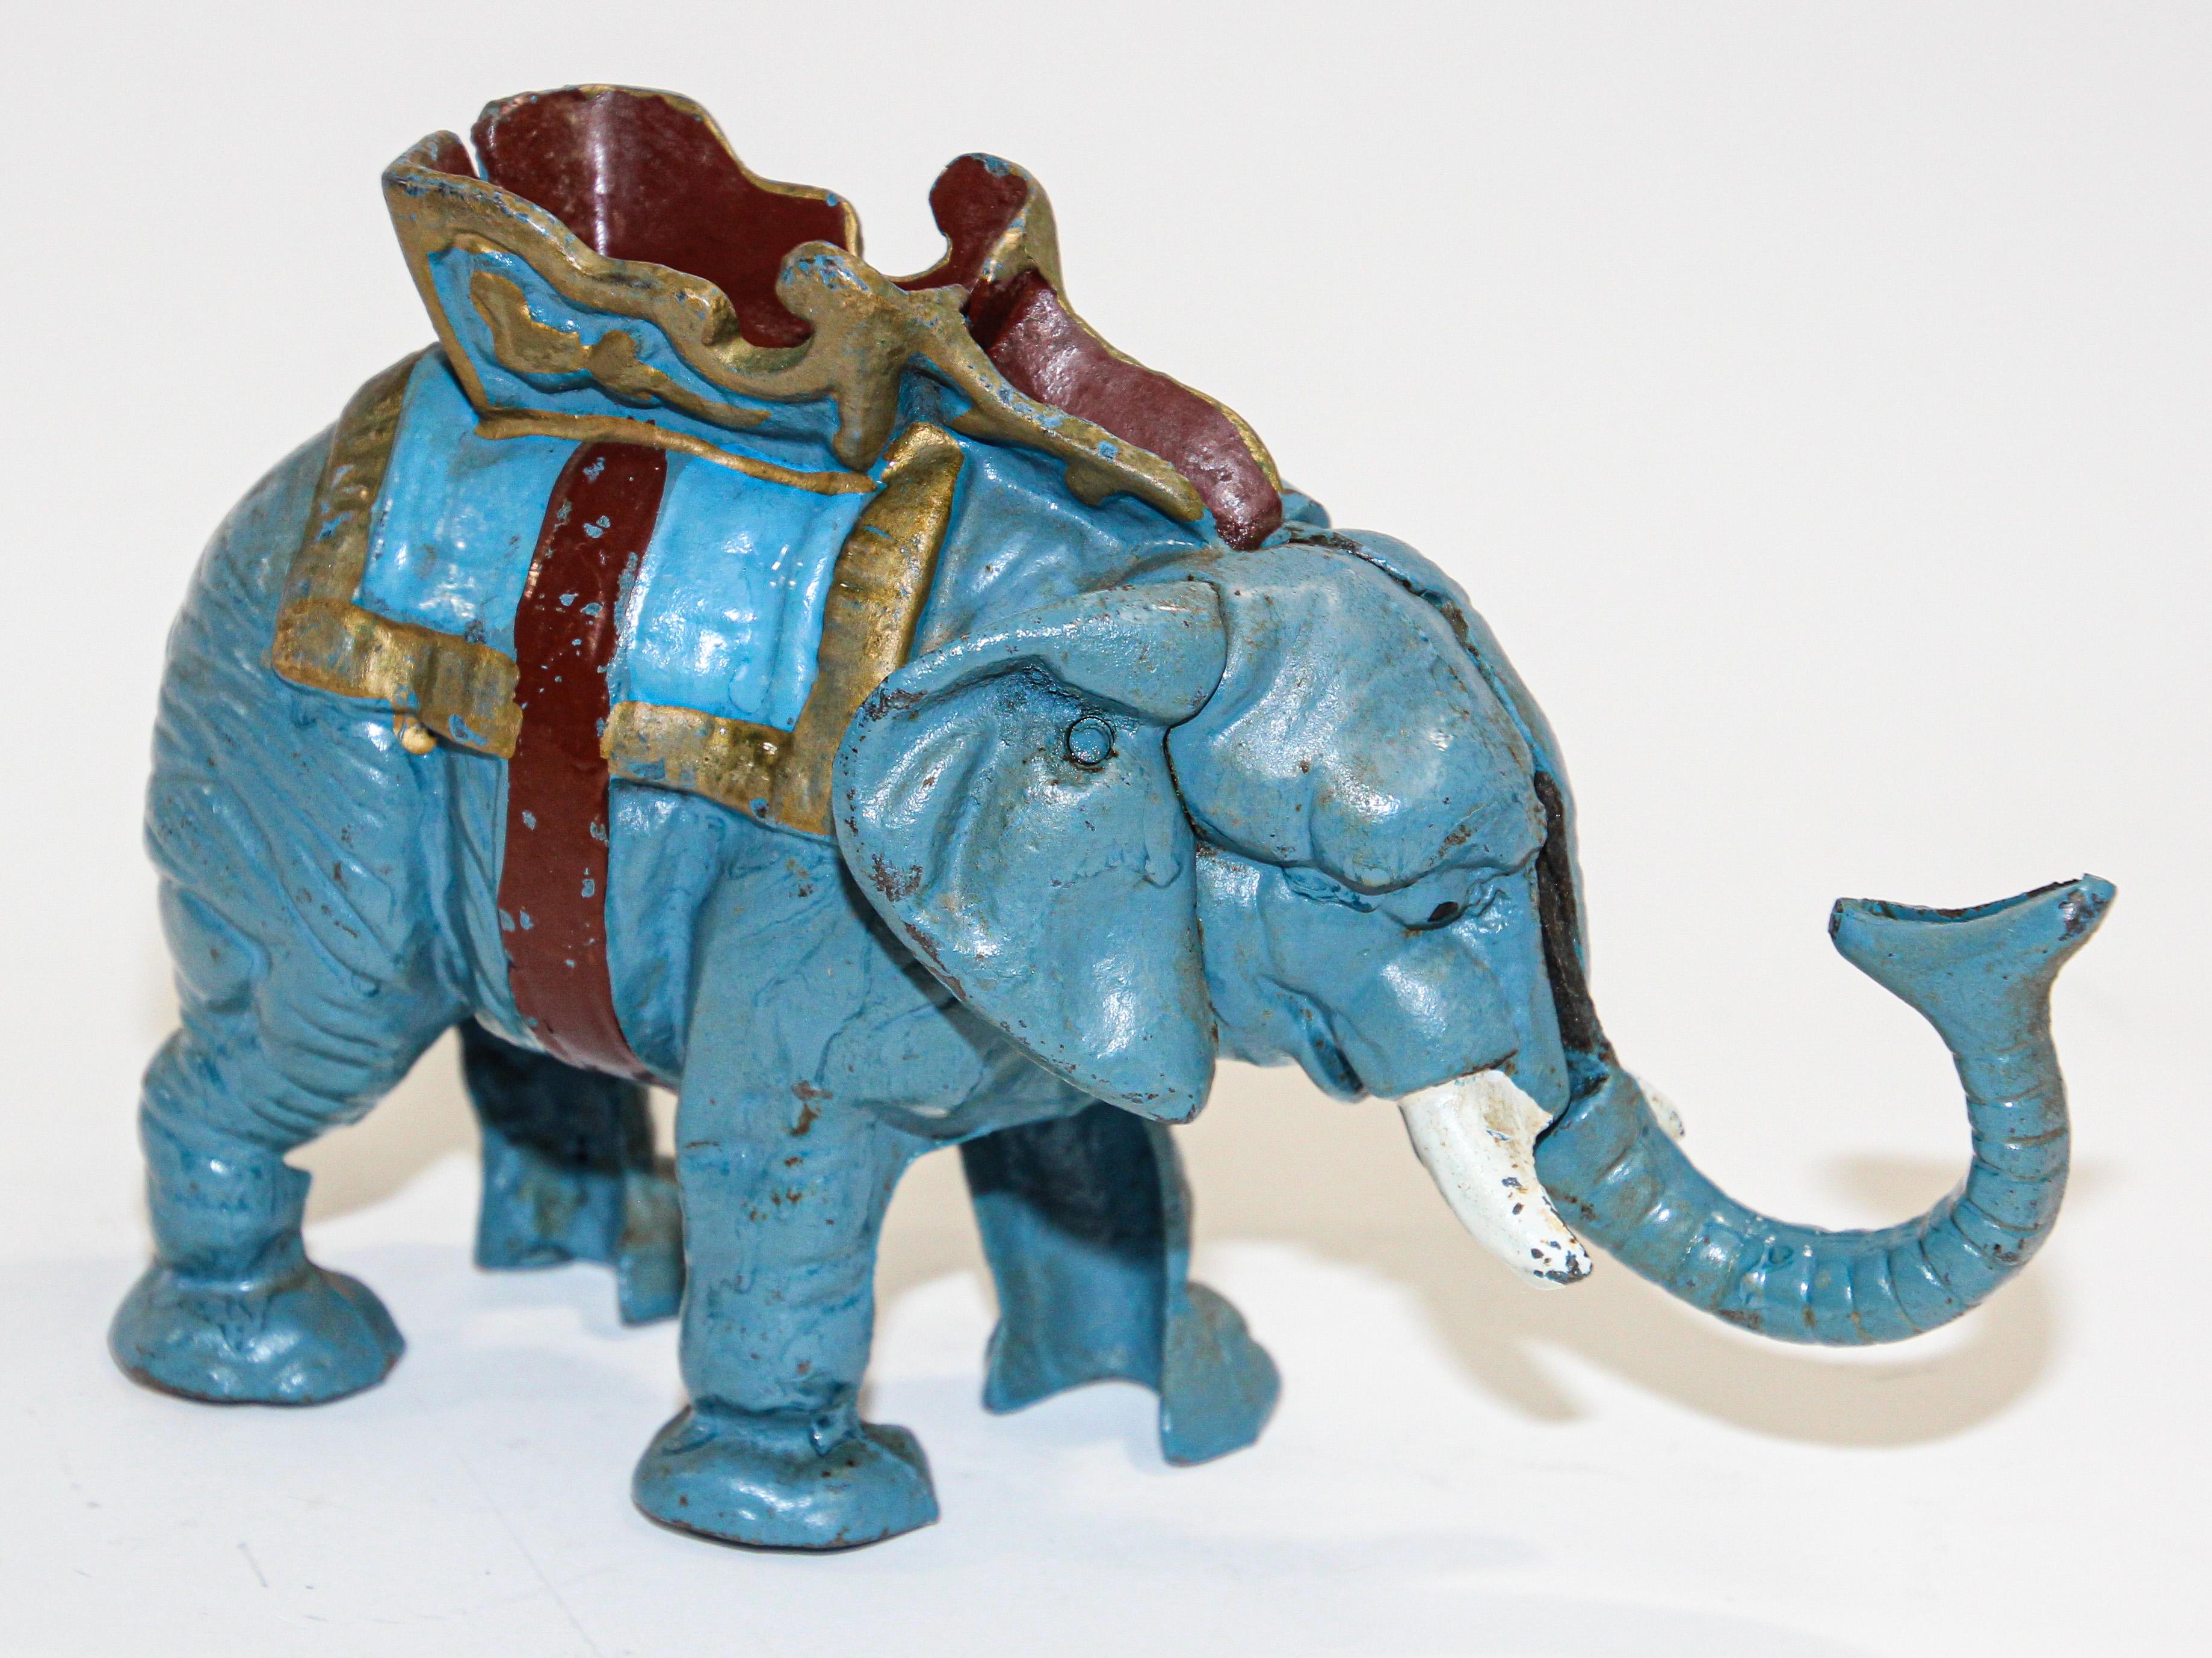 Taiwanese Vintage Mechanical Elephant Cast Iron Bank Collectible Toy